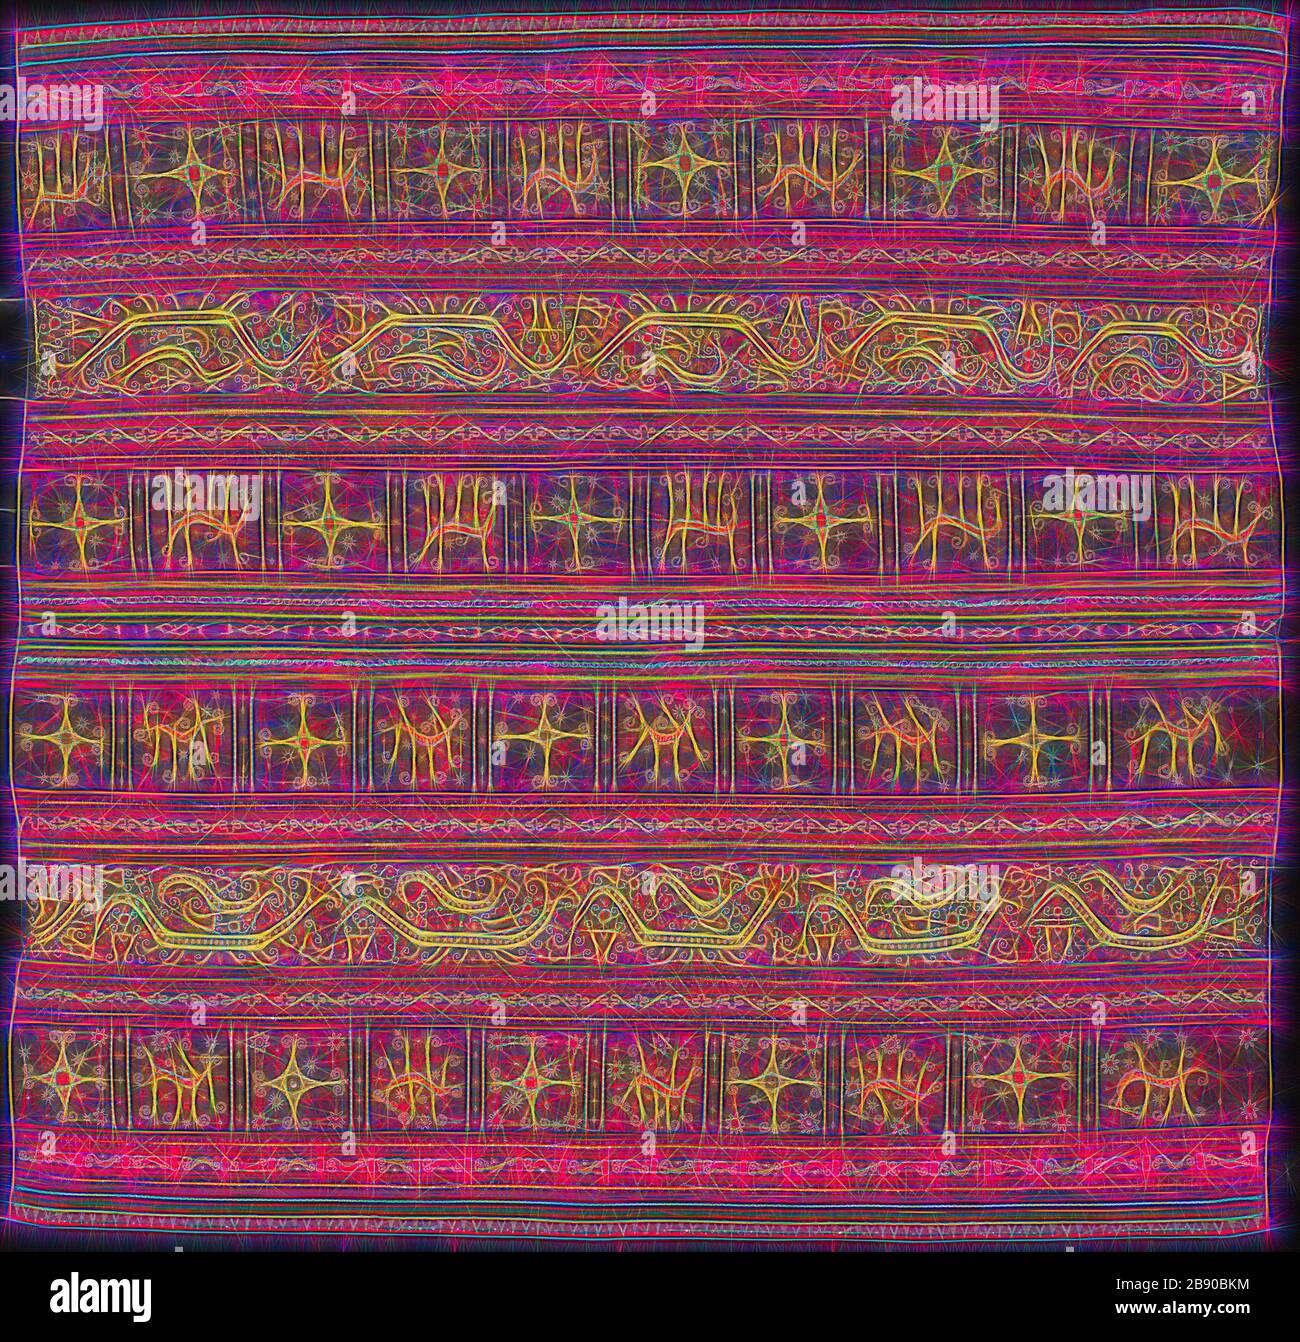 Ceremonial Skirt (tapis), Early 19th century, Abung people, Indonesia, South Sumatra, northern Lampung area, Monggala, Indonesia, Two panels joined: cotton and silk, stripes of warp-faced, weft ribbed plain weave, warp-faced, weft ribbed plain weave with supplementary brocading wefts, and warp resist dyed (warp ikat) plain weave with supplementary brocading wefts, appliquéd with wool, plain weave, embroidered with silk, cotton, pineapple fiber, silver-leaf-over-lacquered-paper strip wrapped cotton and silver-leaf-over-lacquered-paper strip wrapped bast fiber (probably ramie) in buttonhole, dou Stock Photo